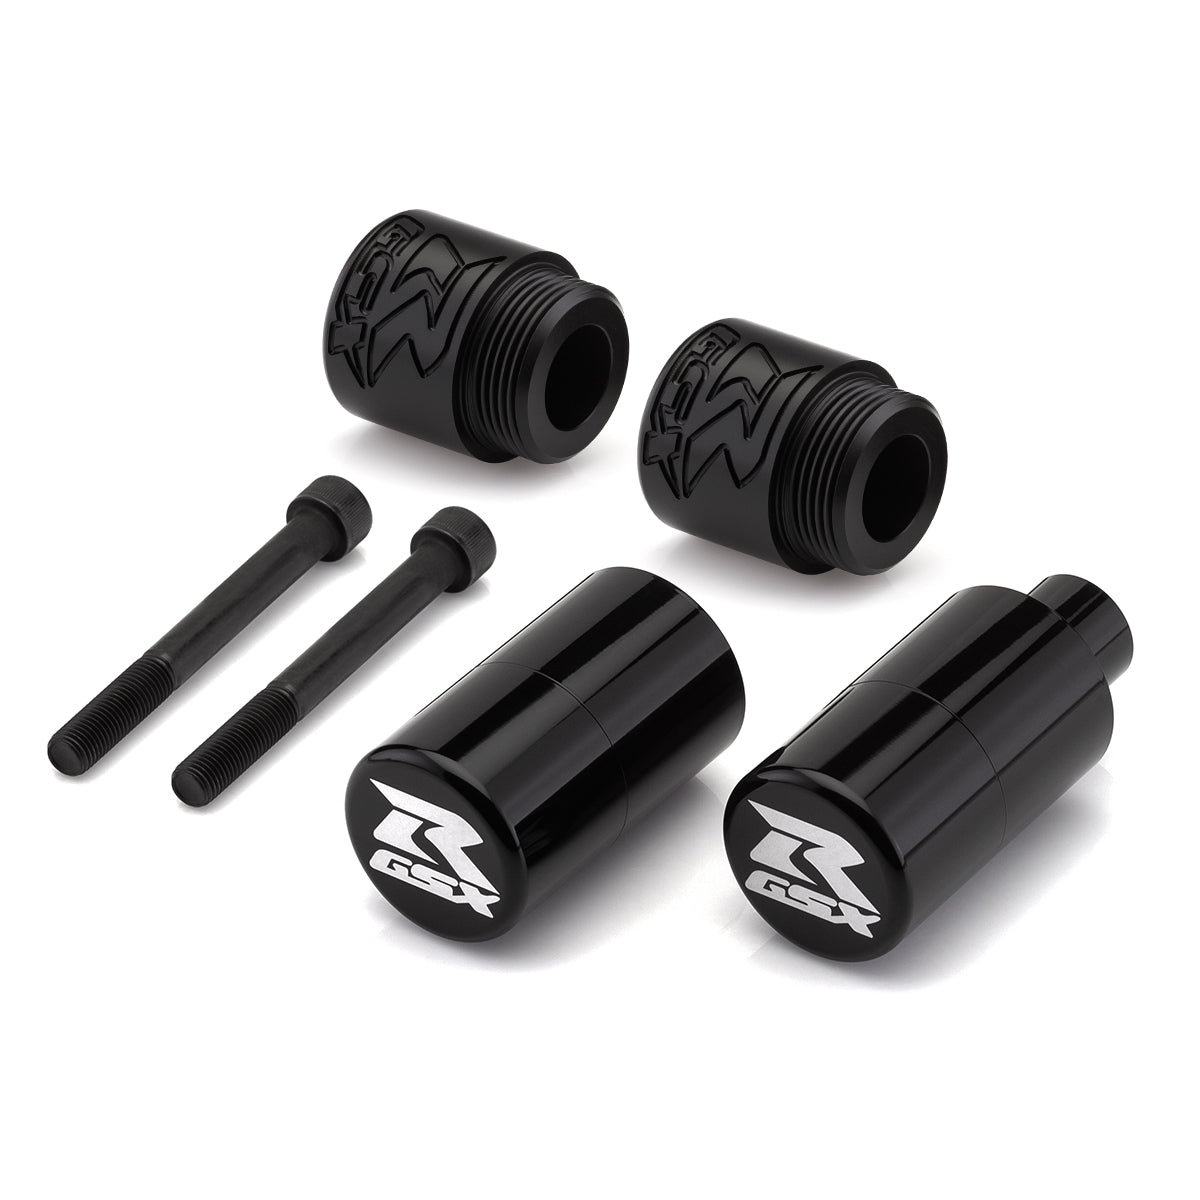 2004-2005 Suzuki GSX-R 600 NO CUT Frame Sliders with Replaceable Tips-Frame Slider-Blackpathinc